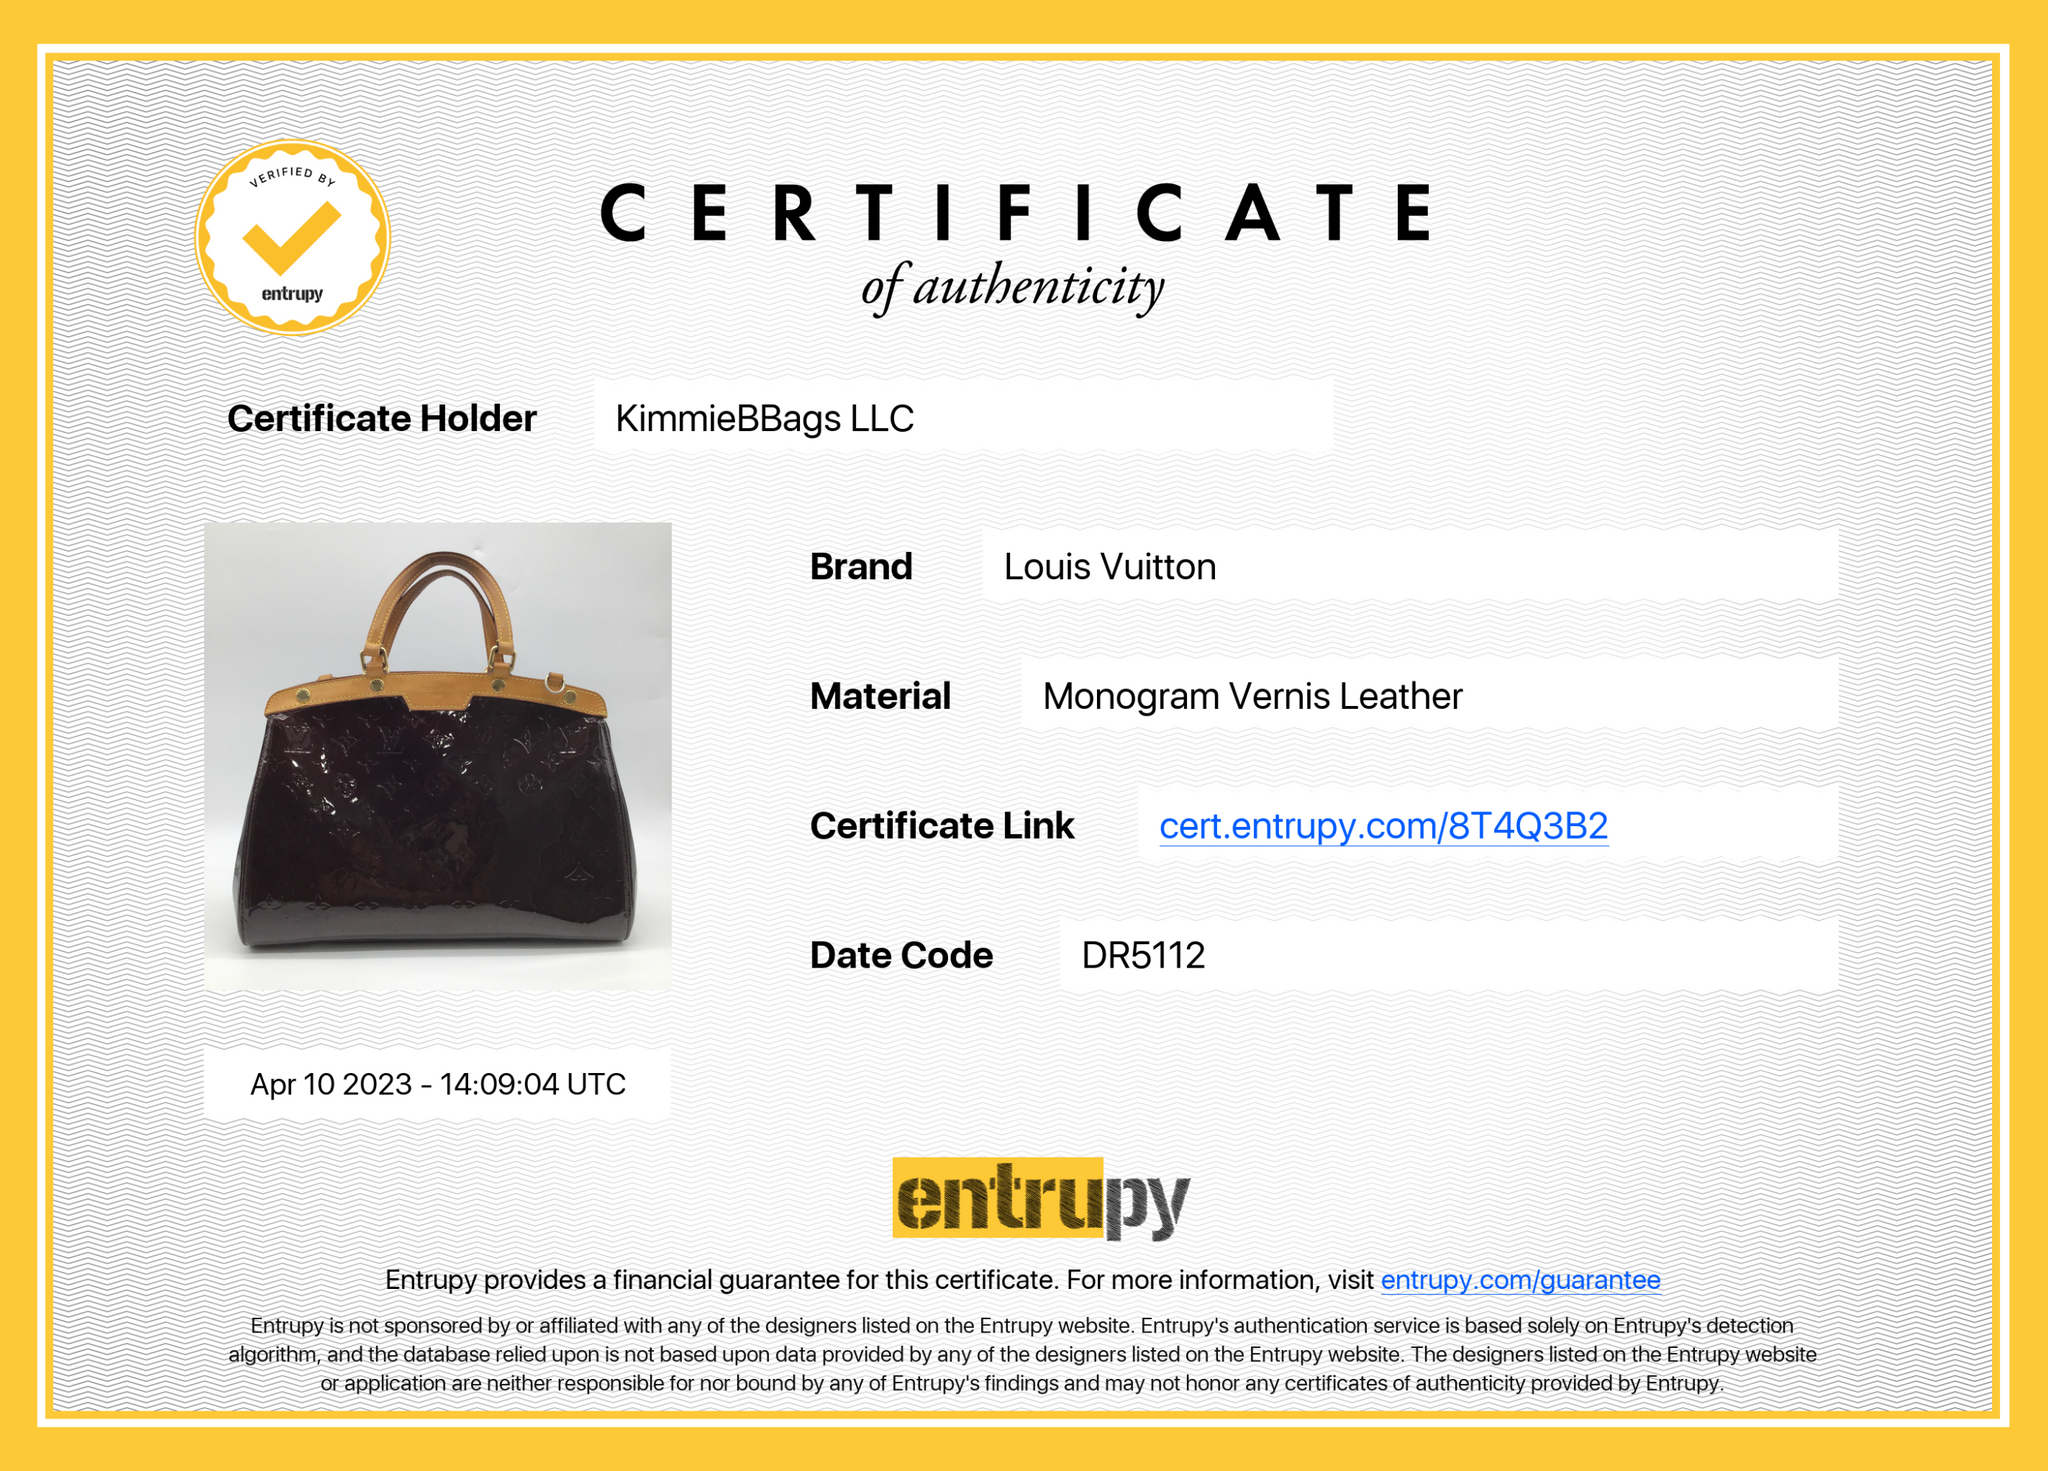 Authenticated Used Louis Vuitton Handbag Rosewood Avenue Beige Off